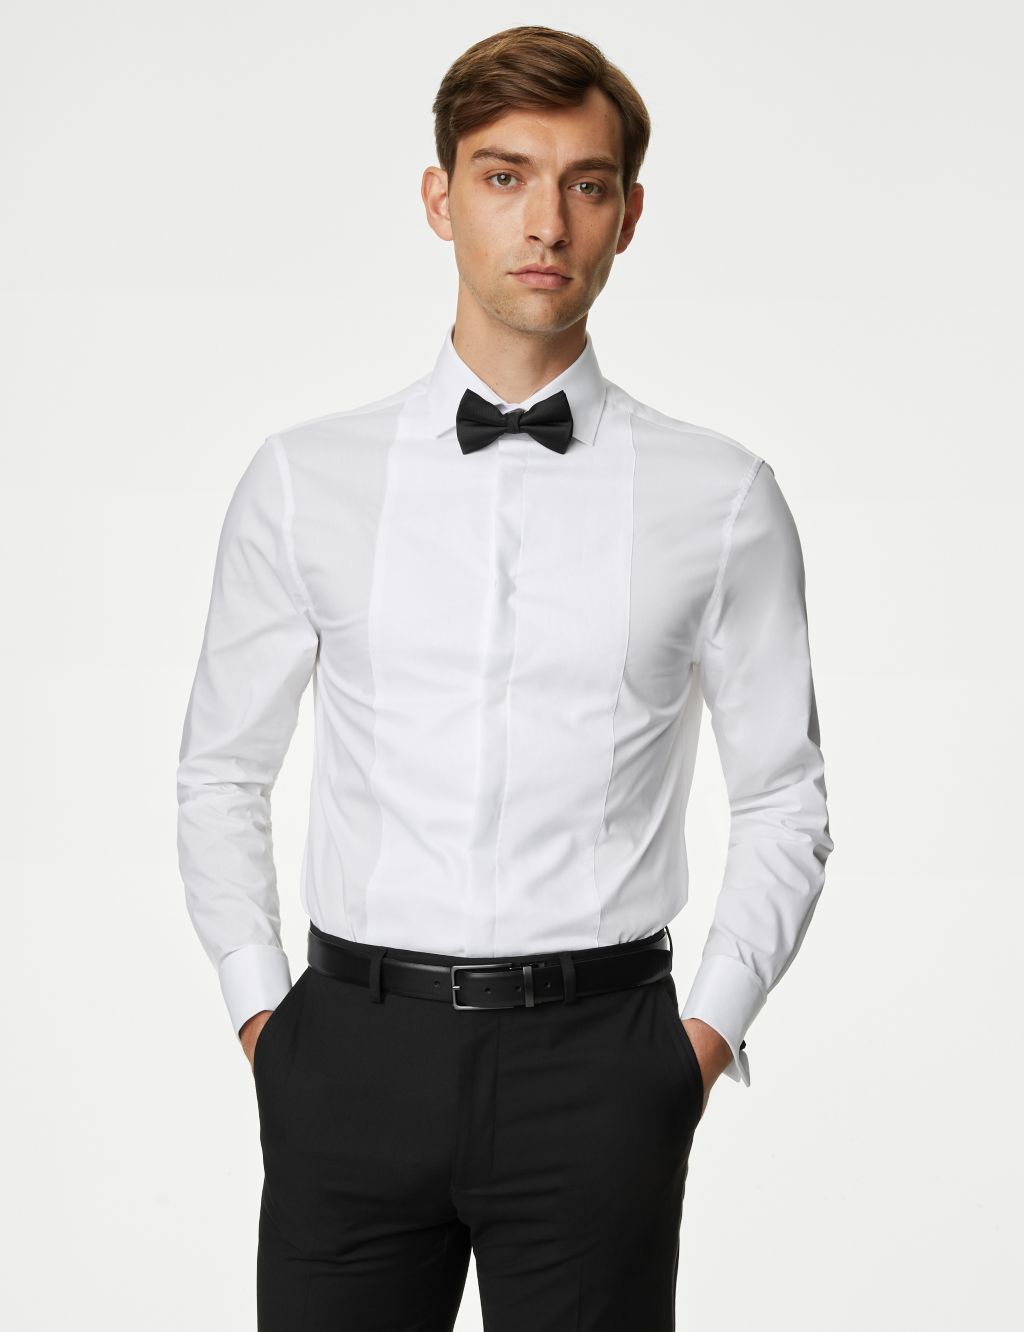 Tailored Fit Dinner Shirt with Bow Tie image 1